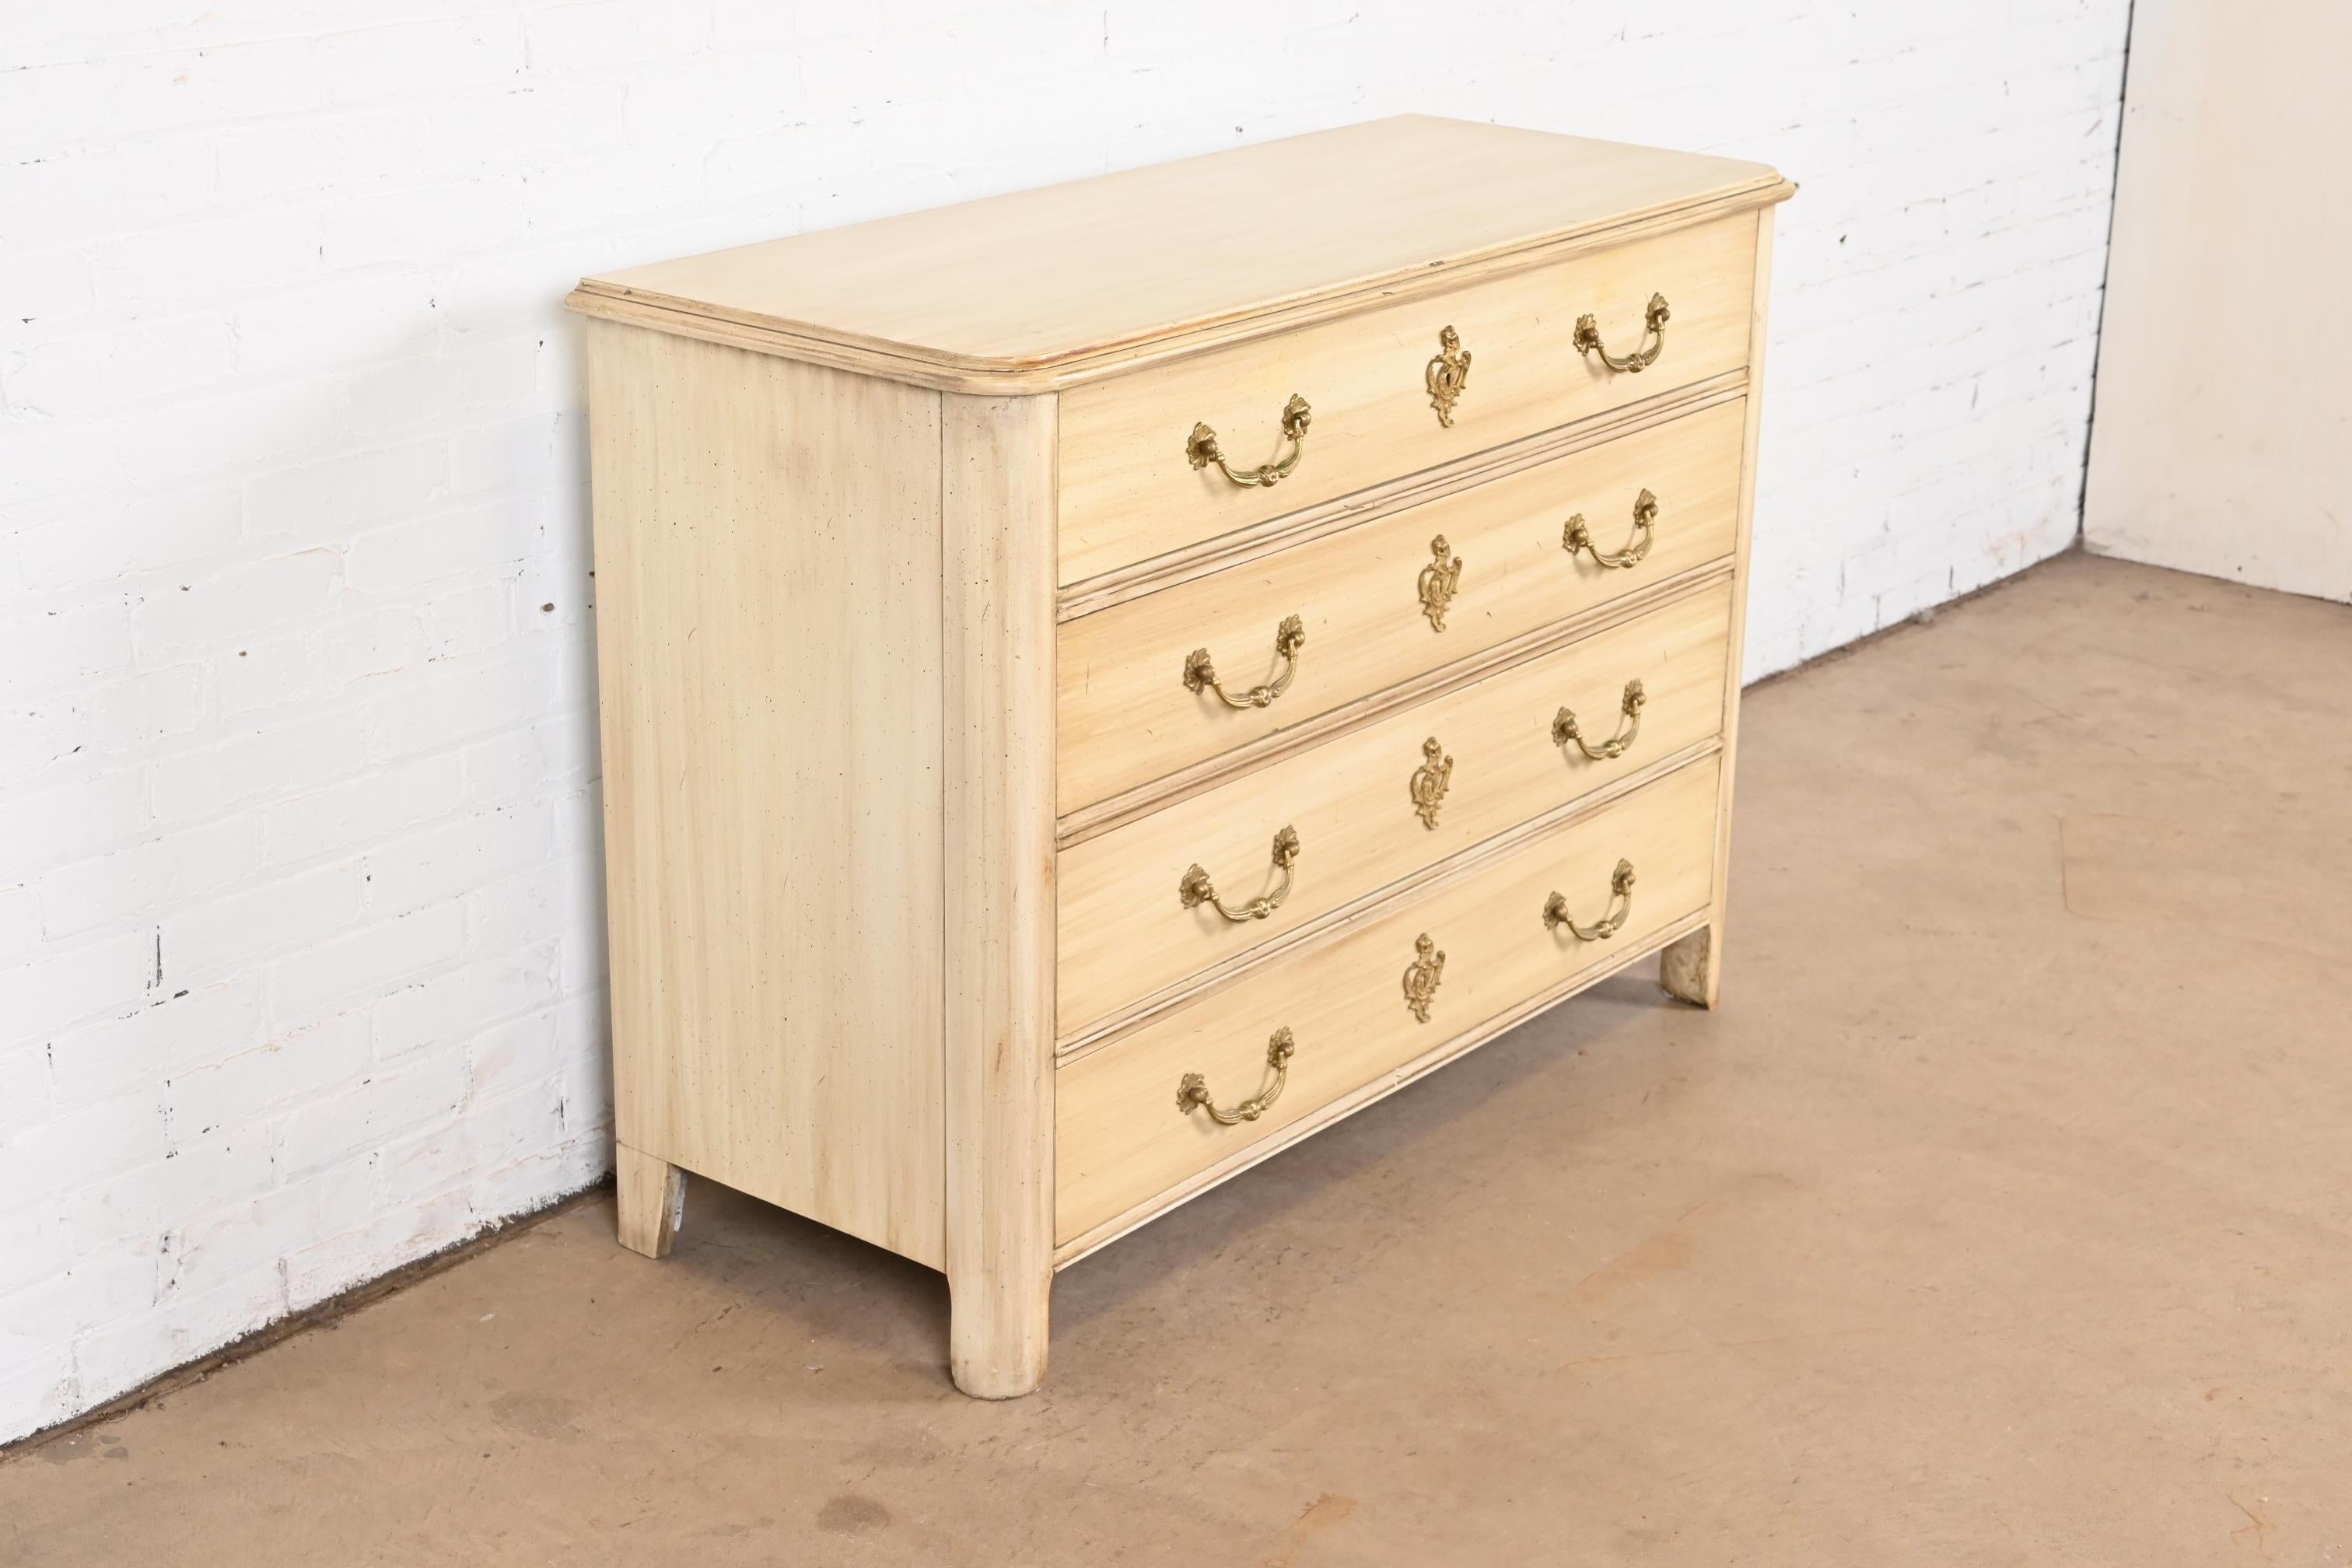 Mid-20th Century Baker Furniture French Provincial Cream Painted Chest of Drawers, Circa 1960s For Sale